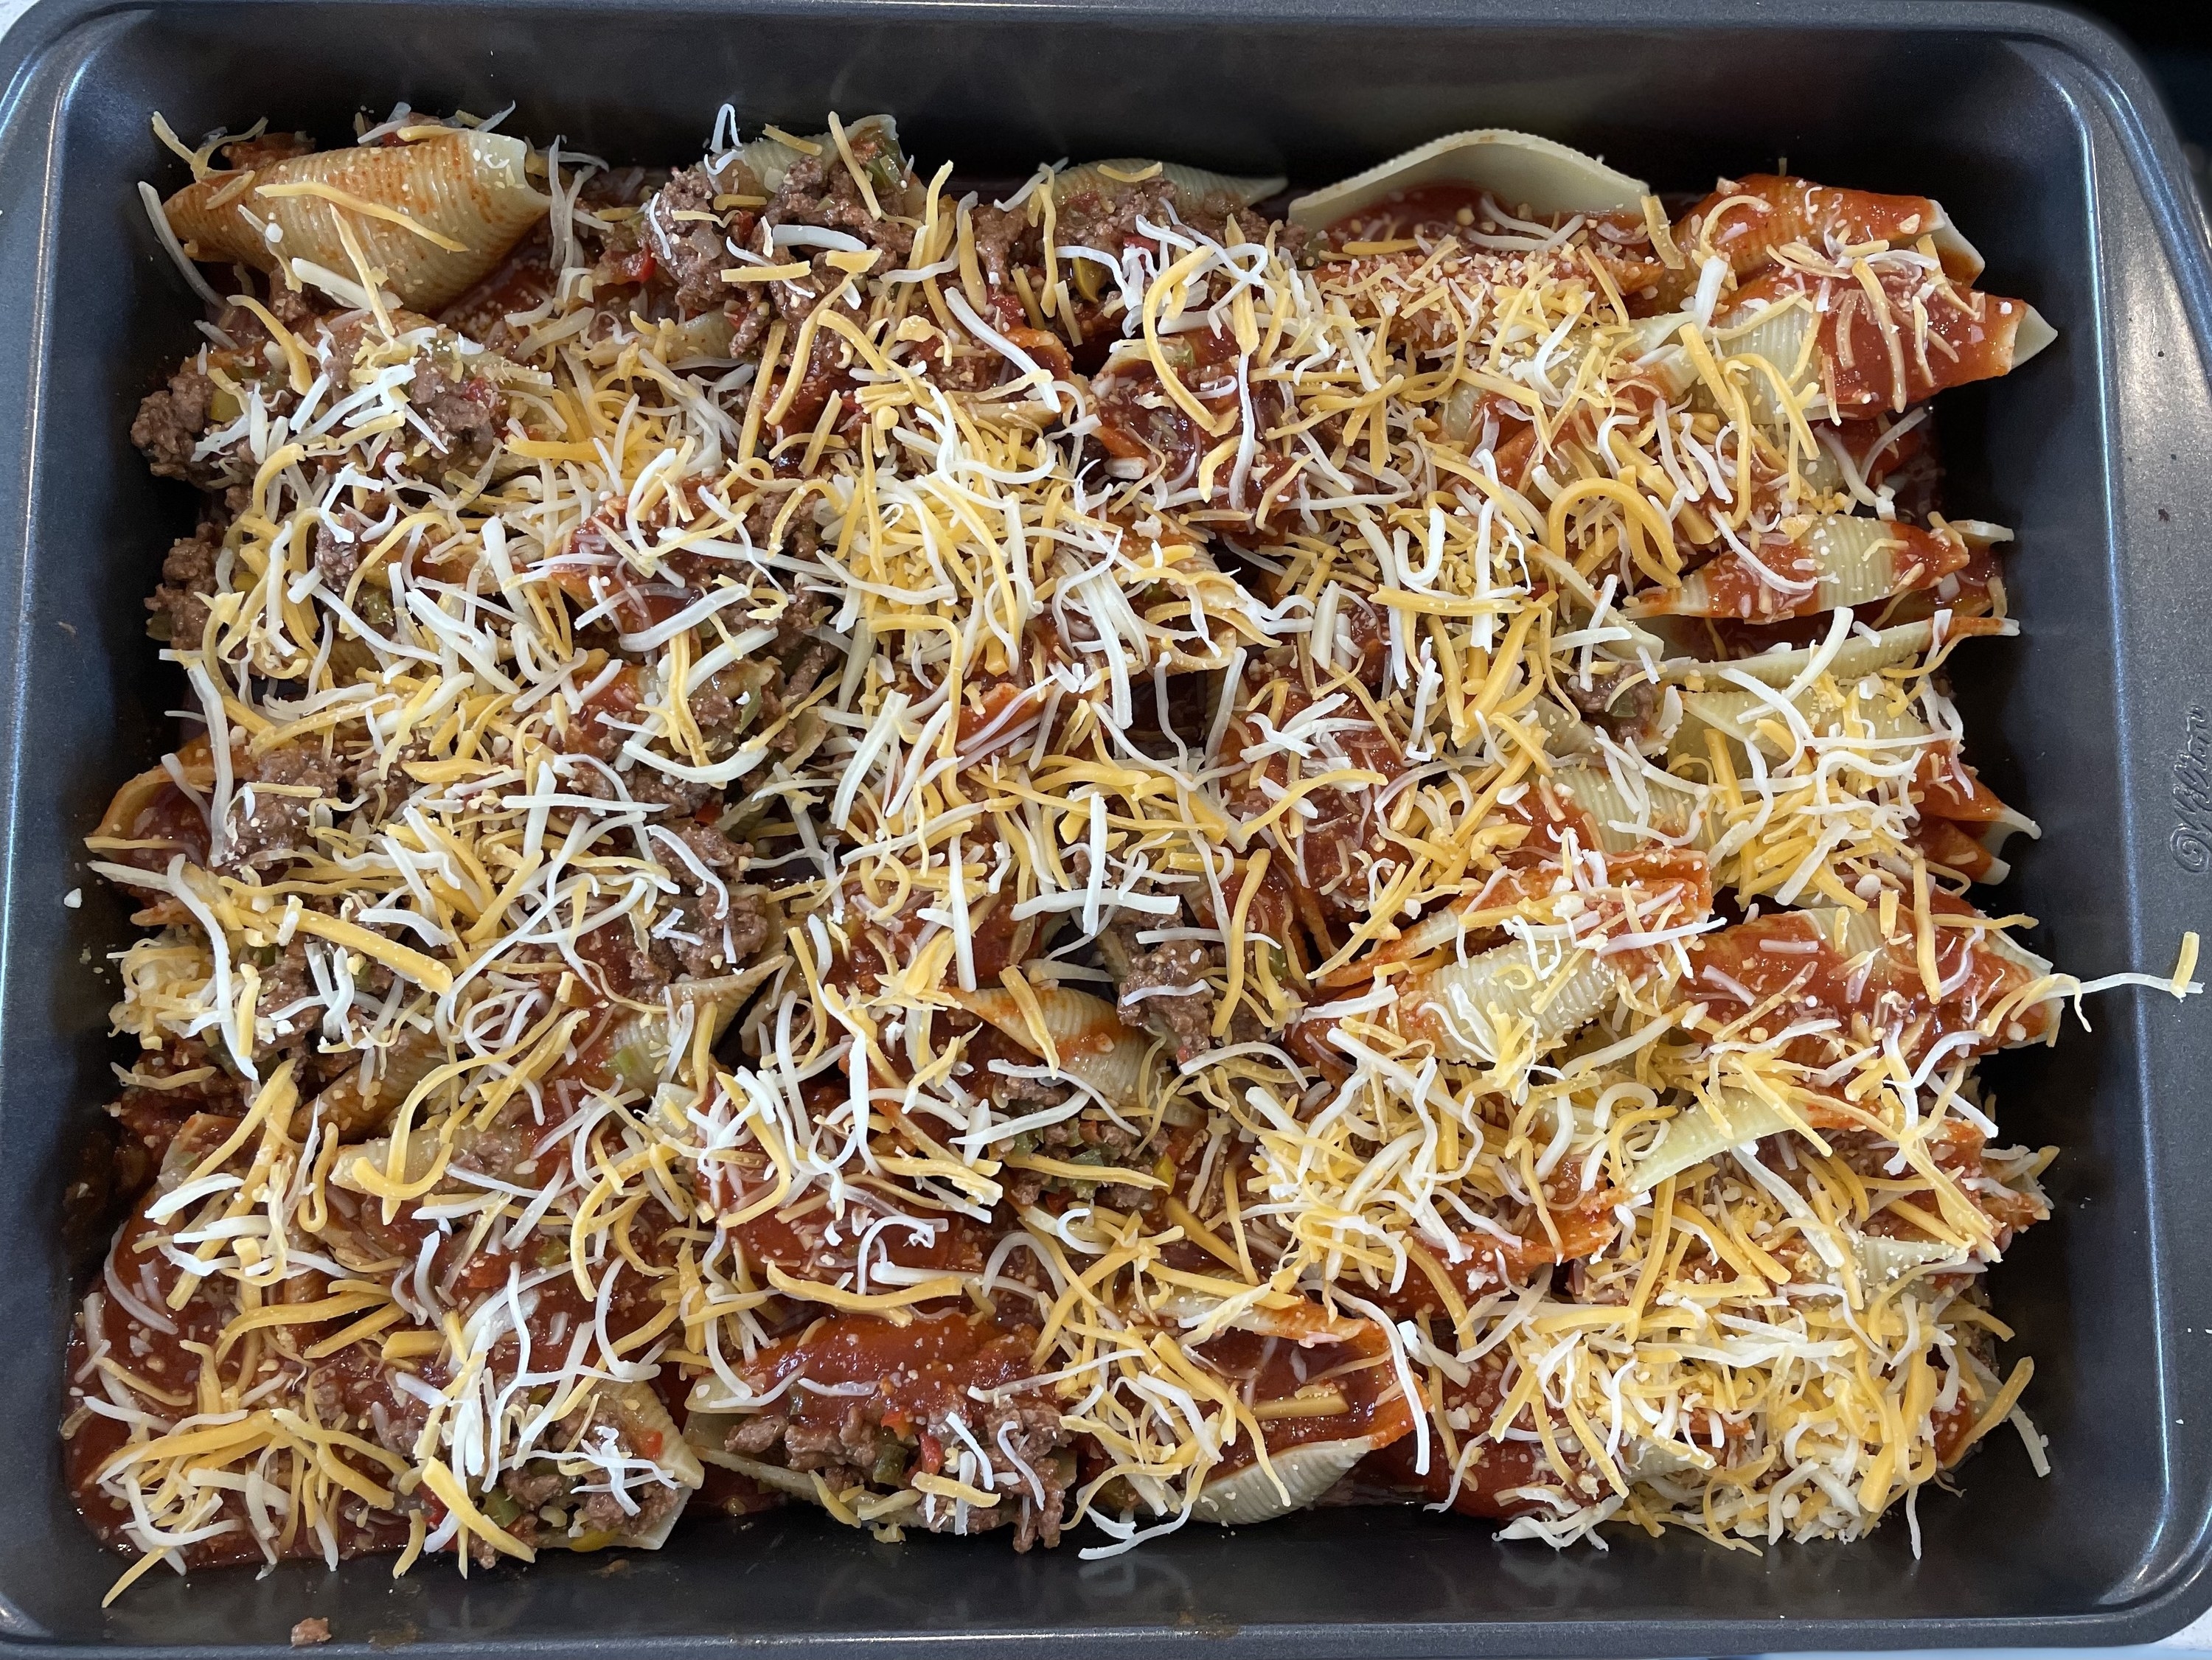 Stuffed shells prior to going into the oven